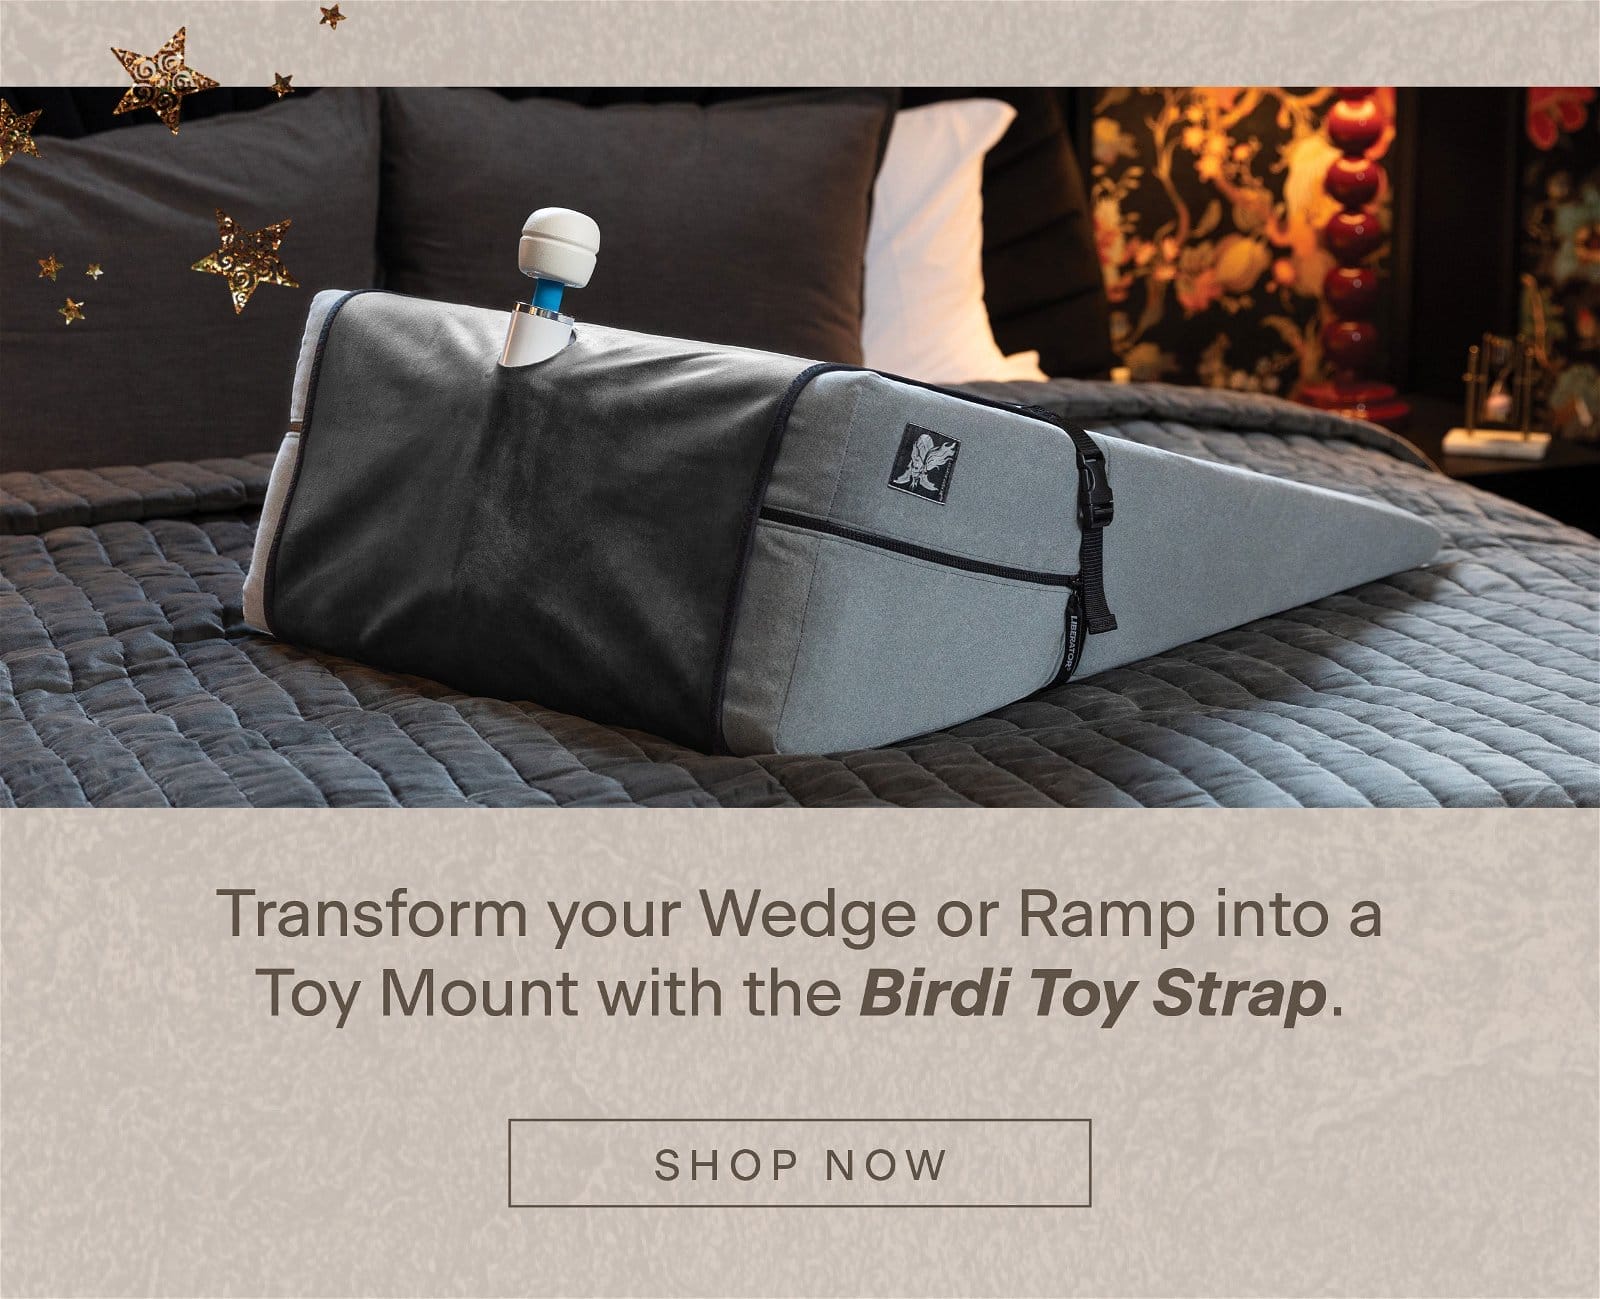 Birdi – Transform your Wedge or Ramp into a Toy Mount with the Birdi Toy Strap.